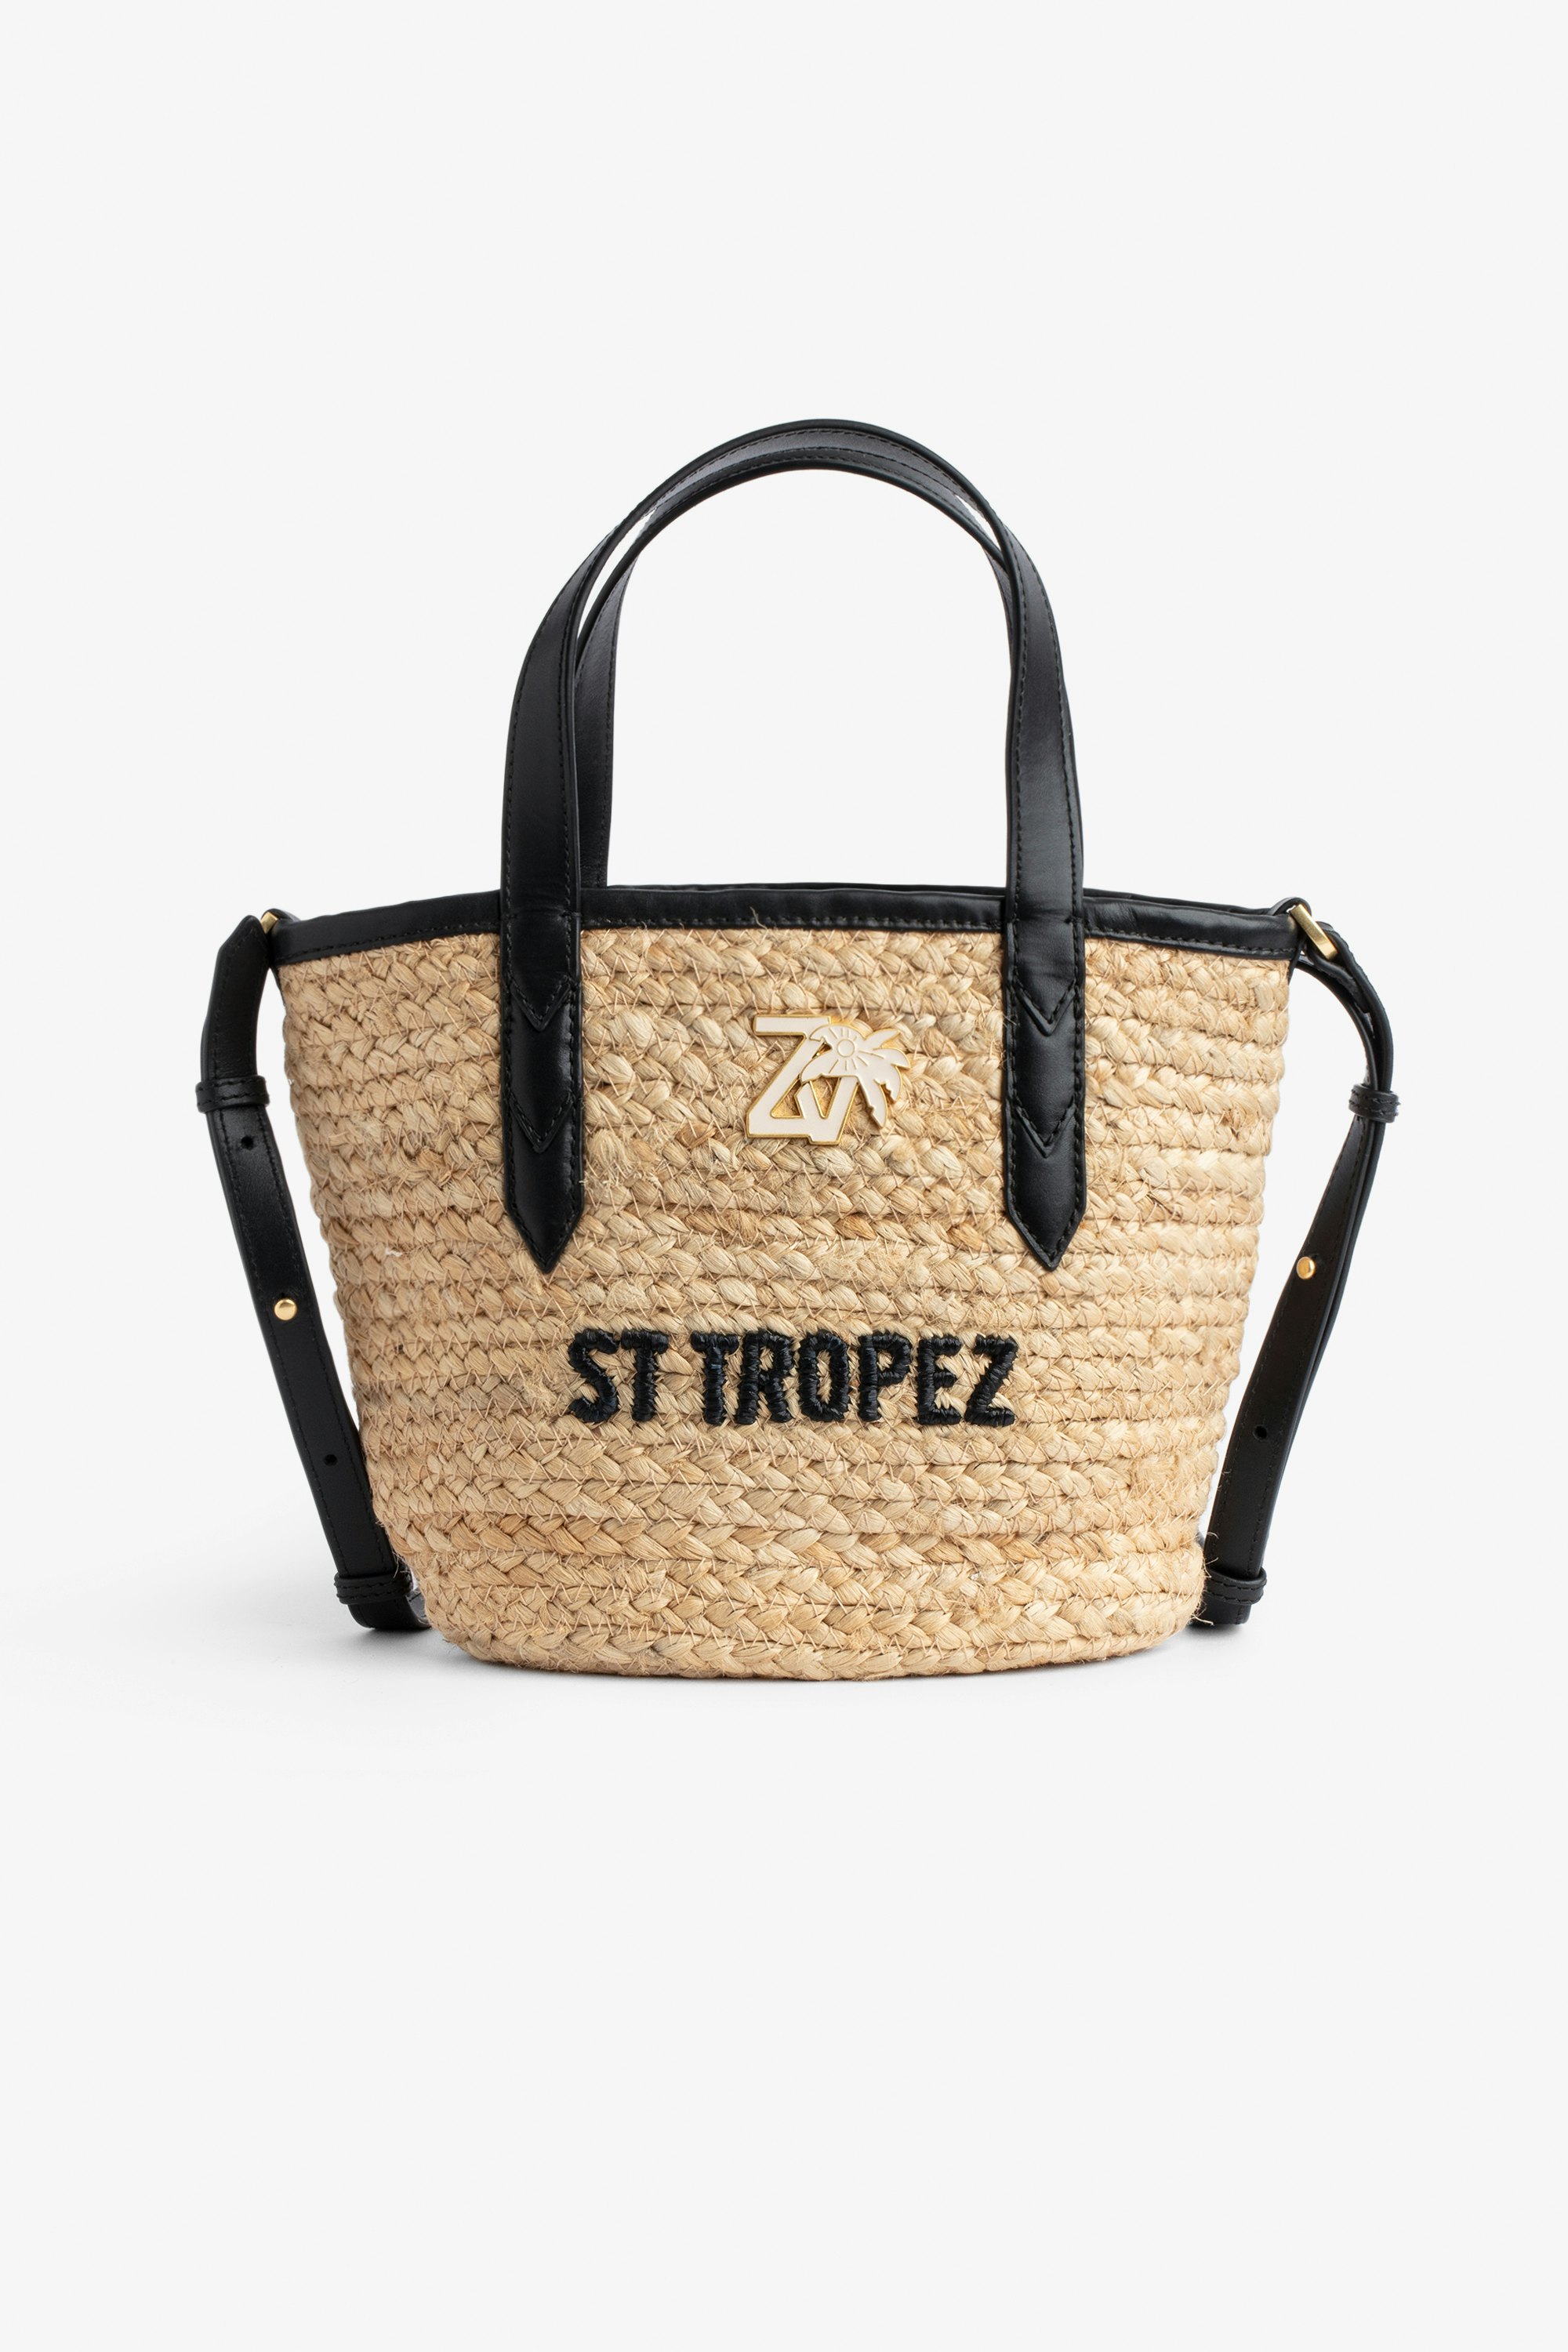 Le Baby Beach Bag Women's straw bag with black leather shoulder strap, "St Tropez" embroidery and ZV charm